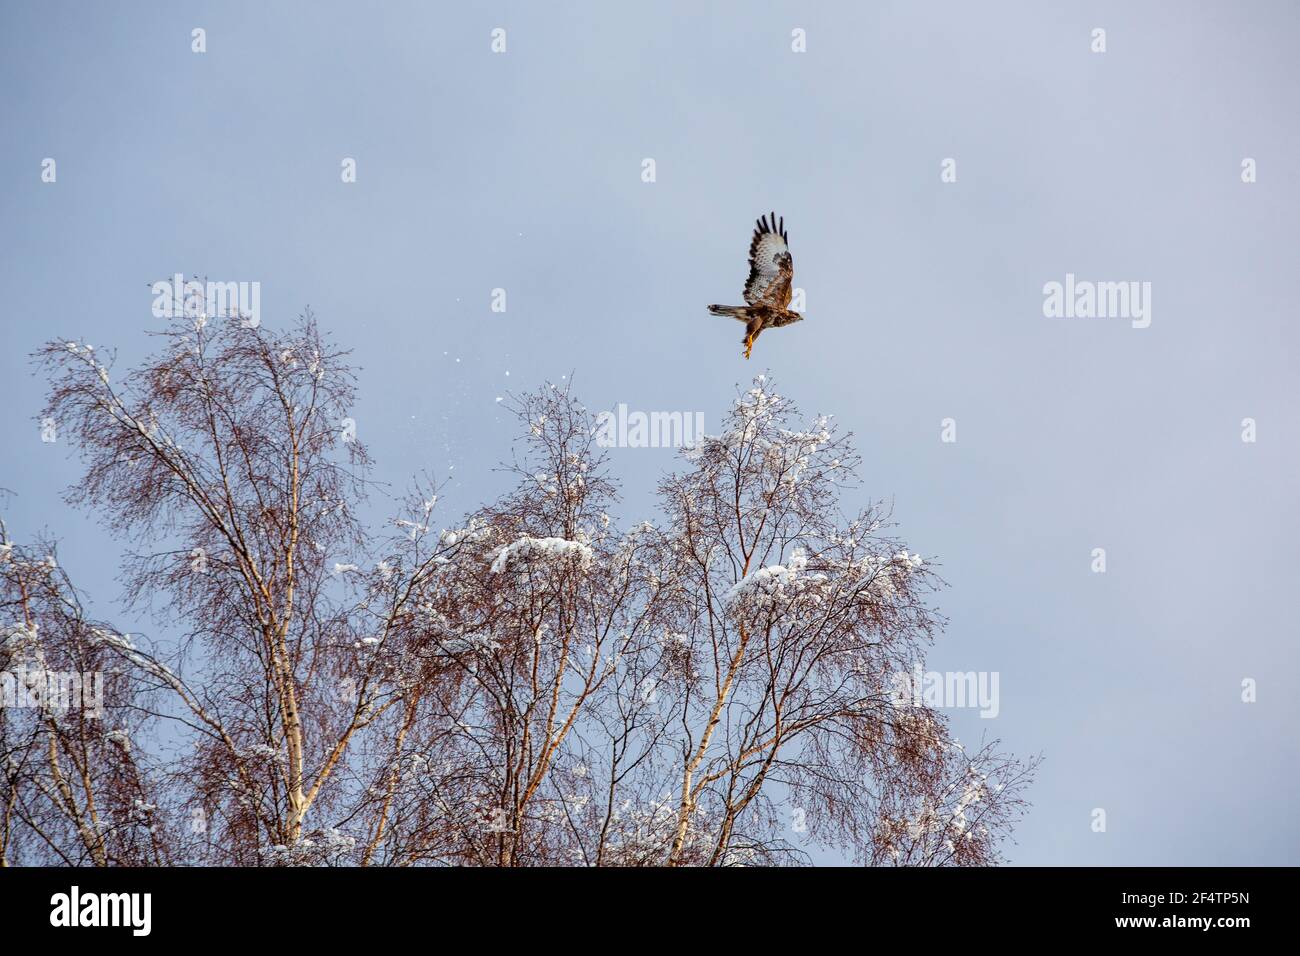 A Common Buzzard taking off from a tree at Tarn Howes in snow, Lake Dsitrict, UK. Stock Photo